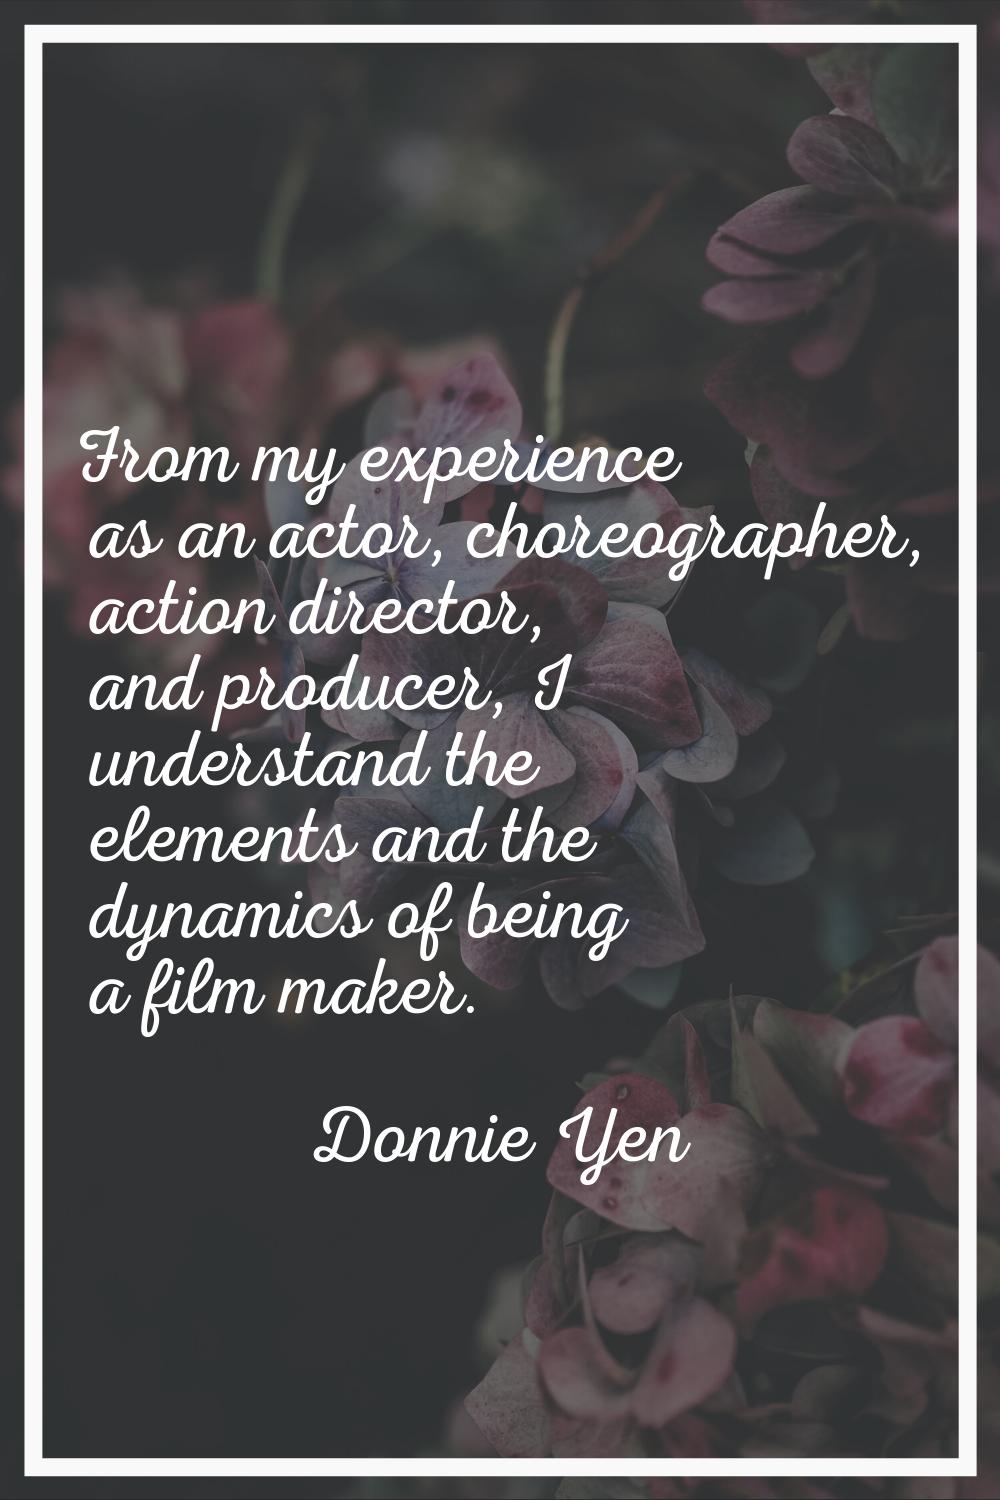 From my experience as an actor, choreographer, action director, and producer, I understand the elem